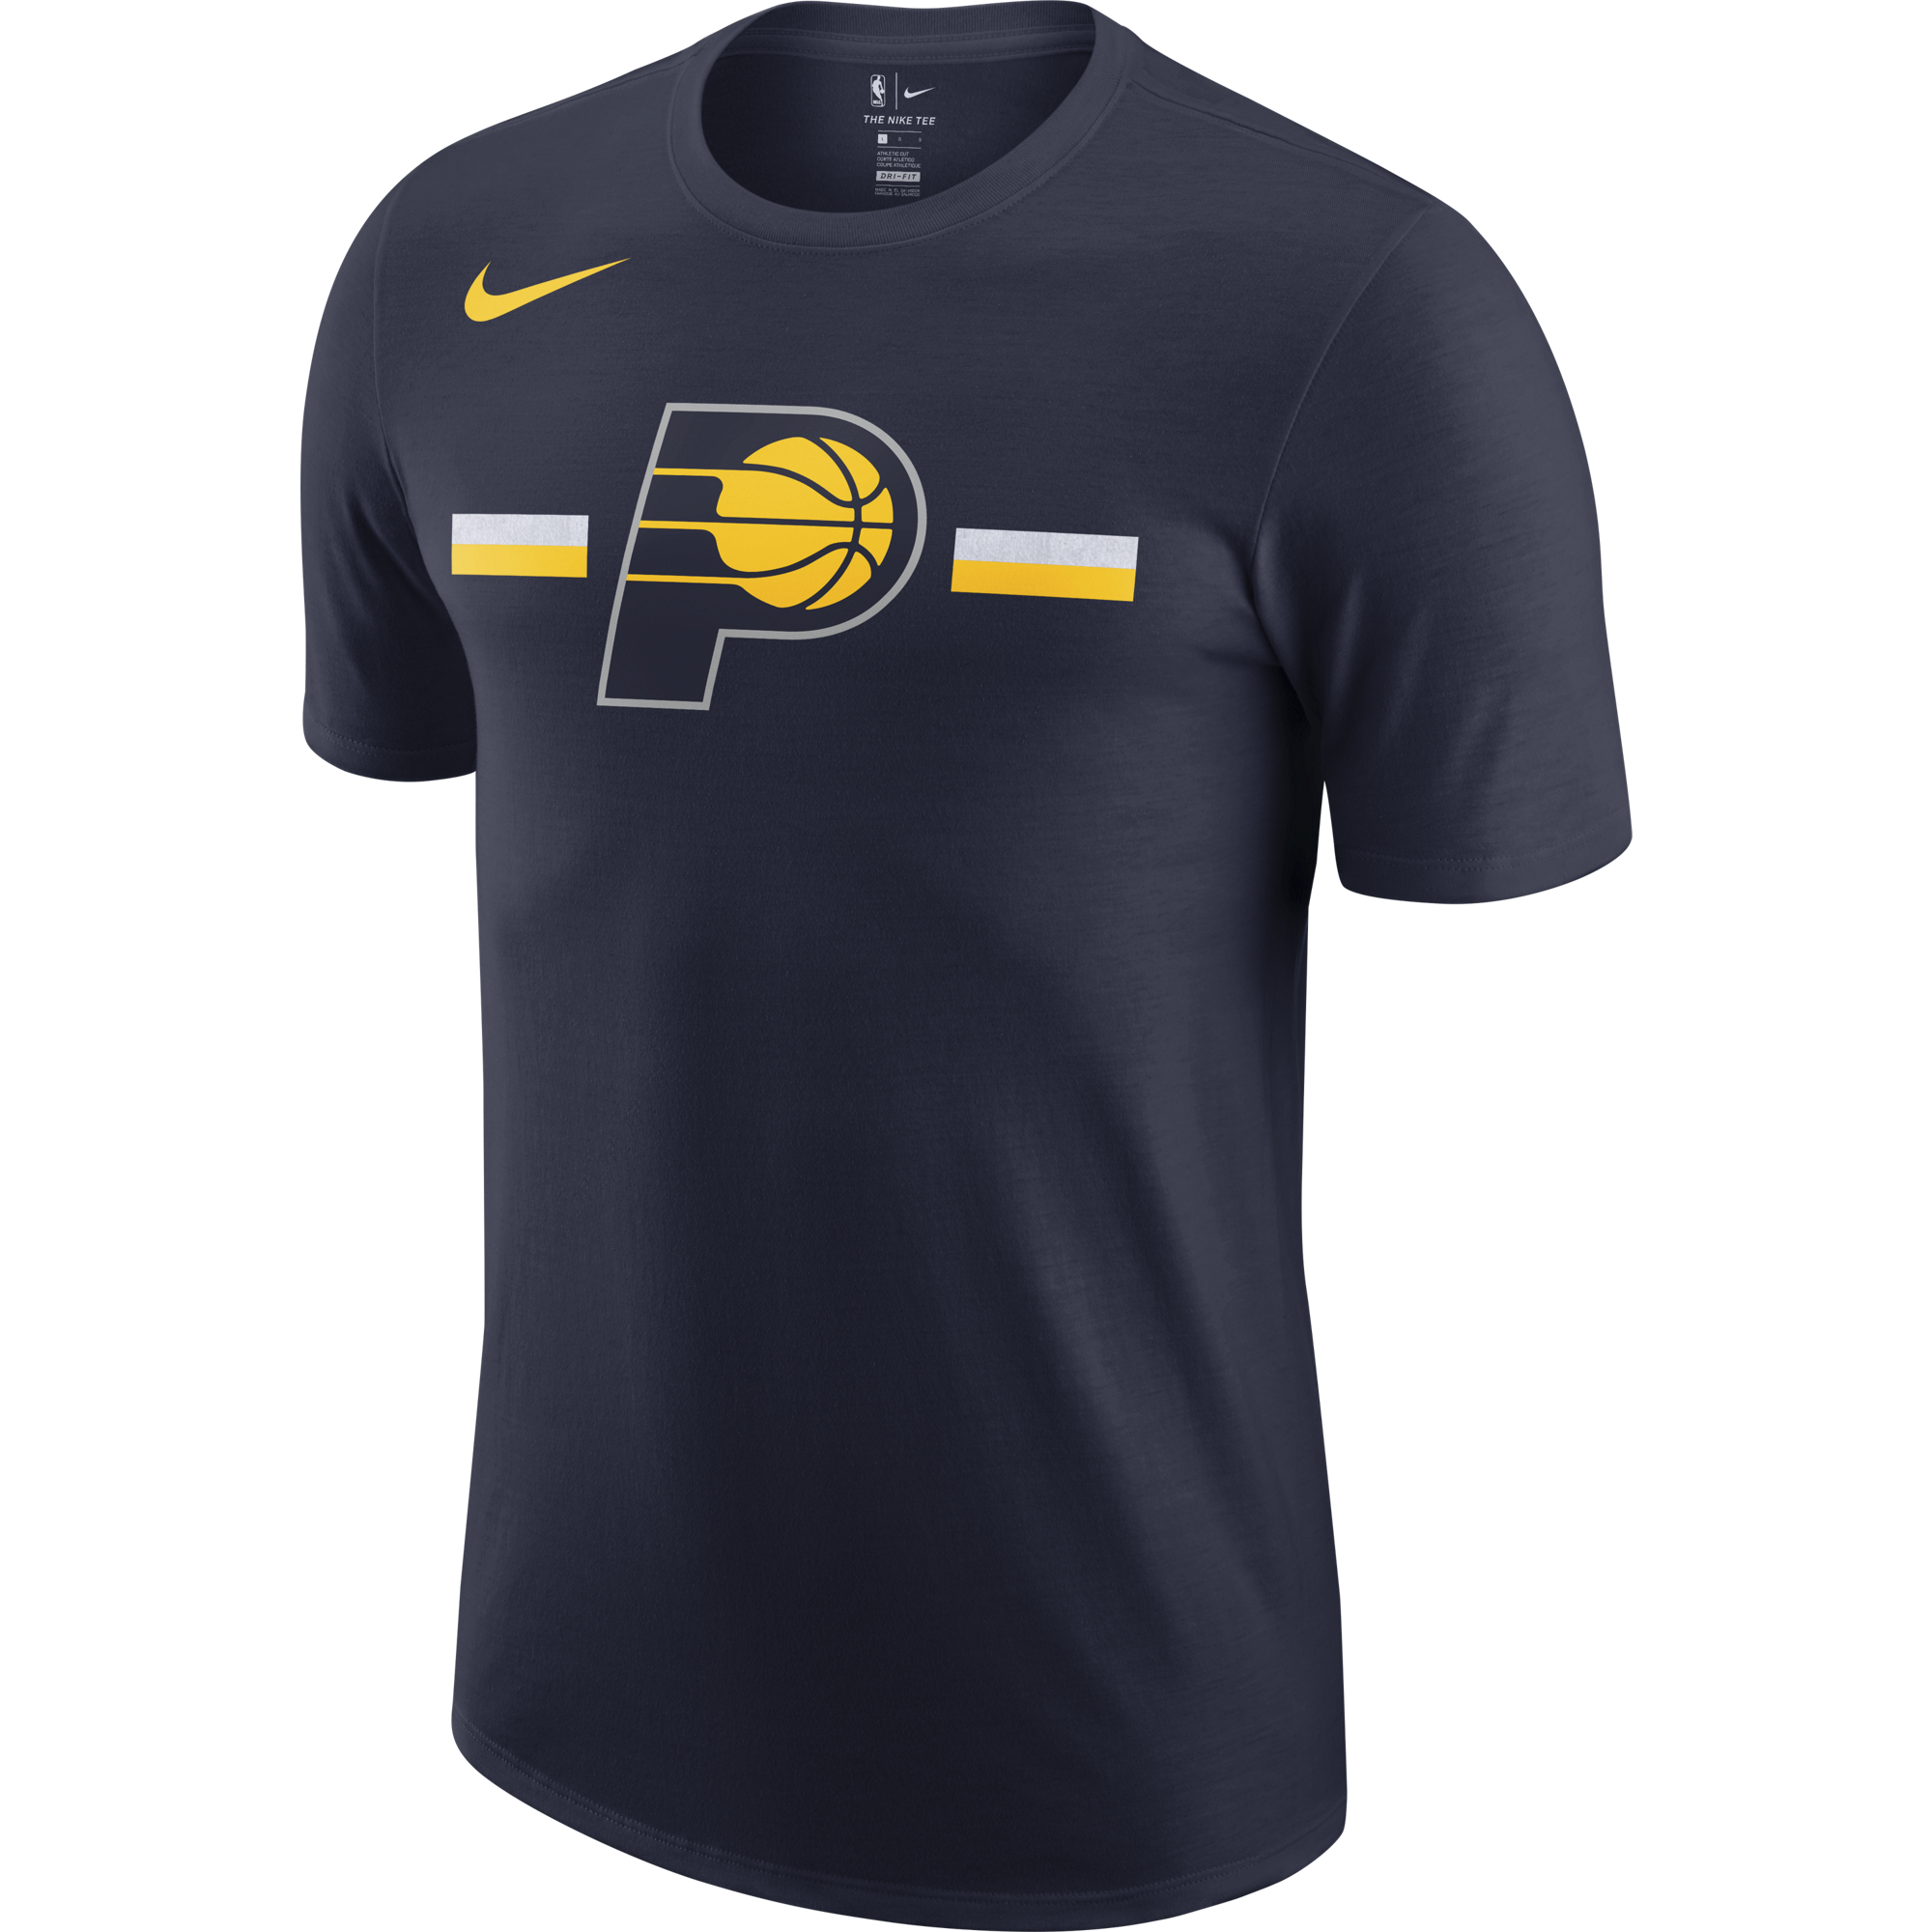 NIKE NBA INDIANA PACERS LOGO DRY TEE COLLEGE NAVY